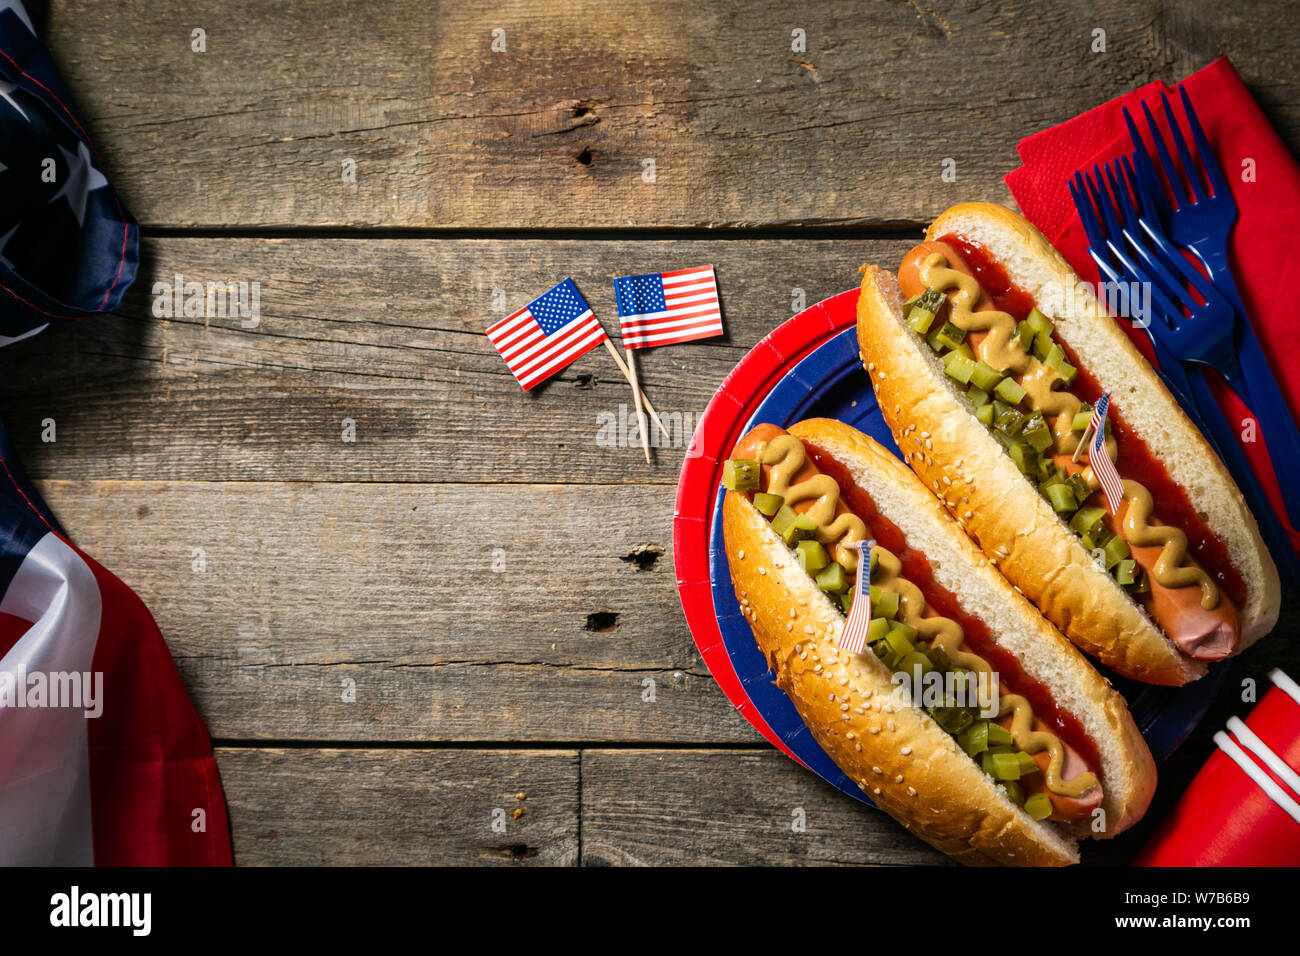 USA national holiday Labor Day, Memorial Day, Flag Day, 4th of July - hot dogs with ketchup and mustard on wood background Stock Photo